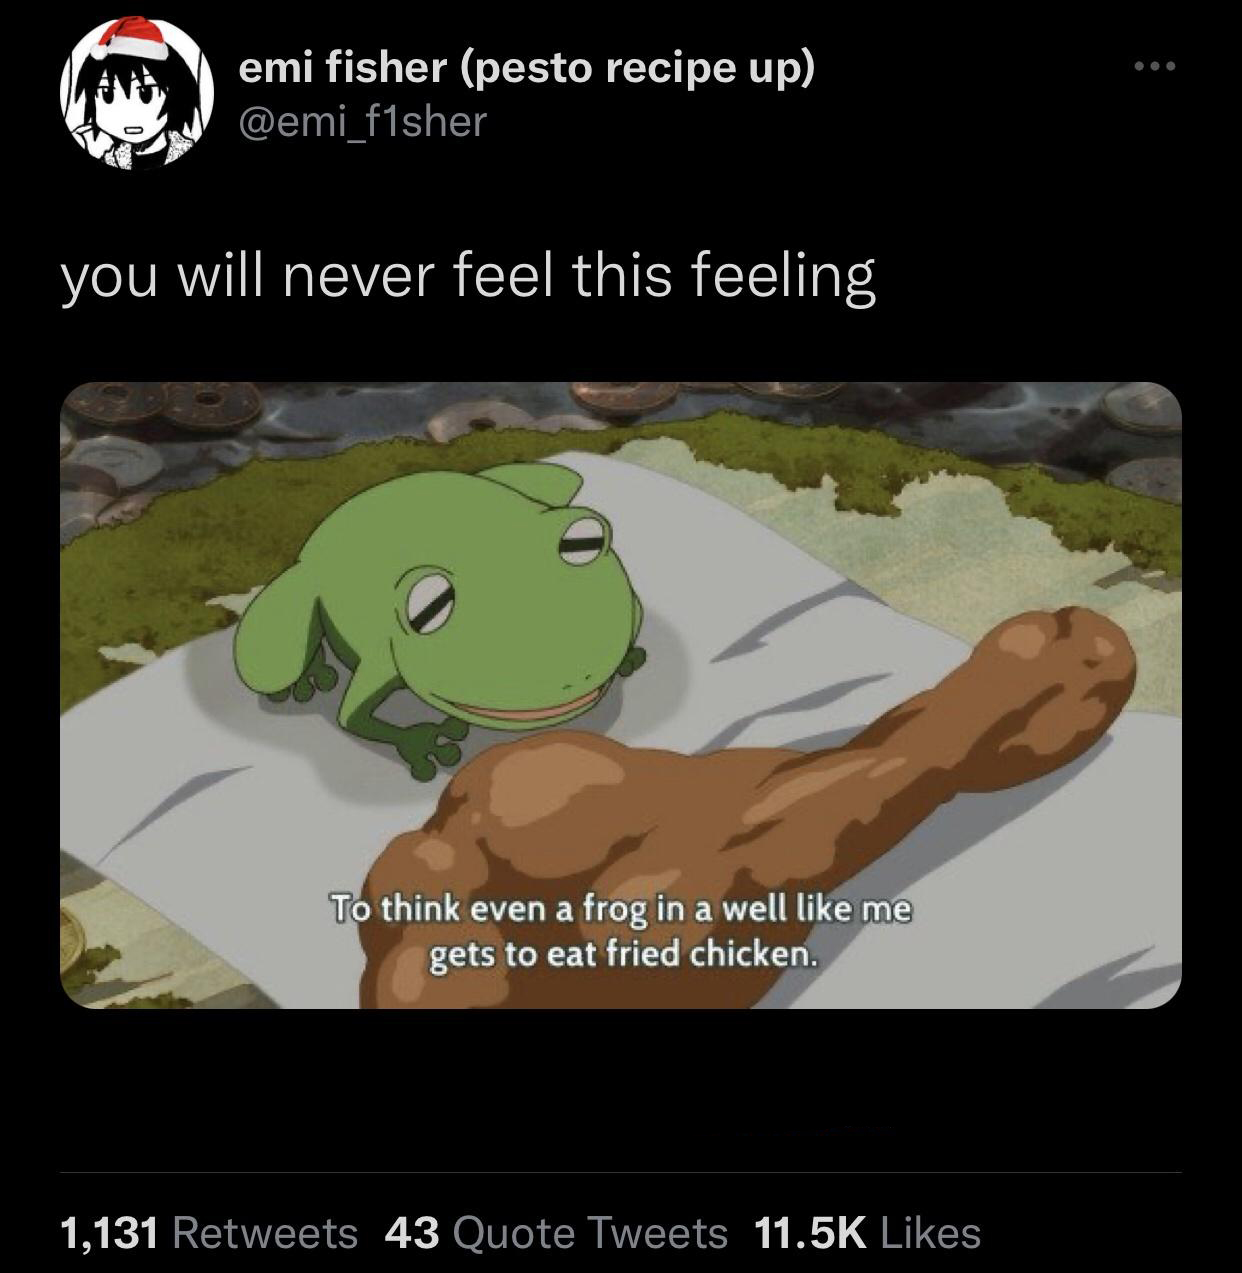 think even a frog in a well like me gets to eat fried chicken - @ @ @ emi fisher pesto recipe up f1sher you will never feel this feeling To think even a frog in a well me gets to eat fried chicken. 1,131 43 Quote Tweets